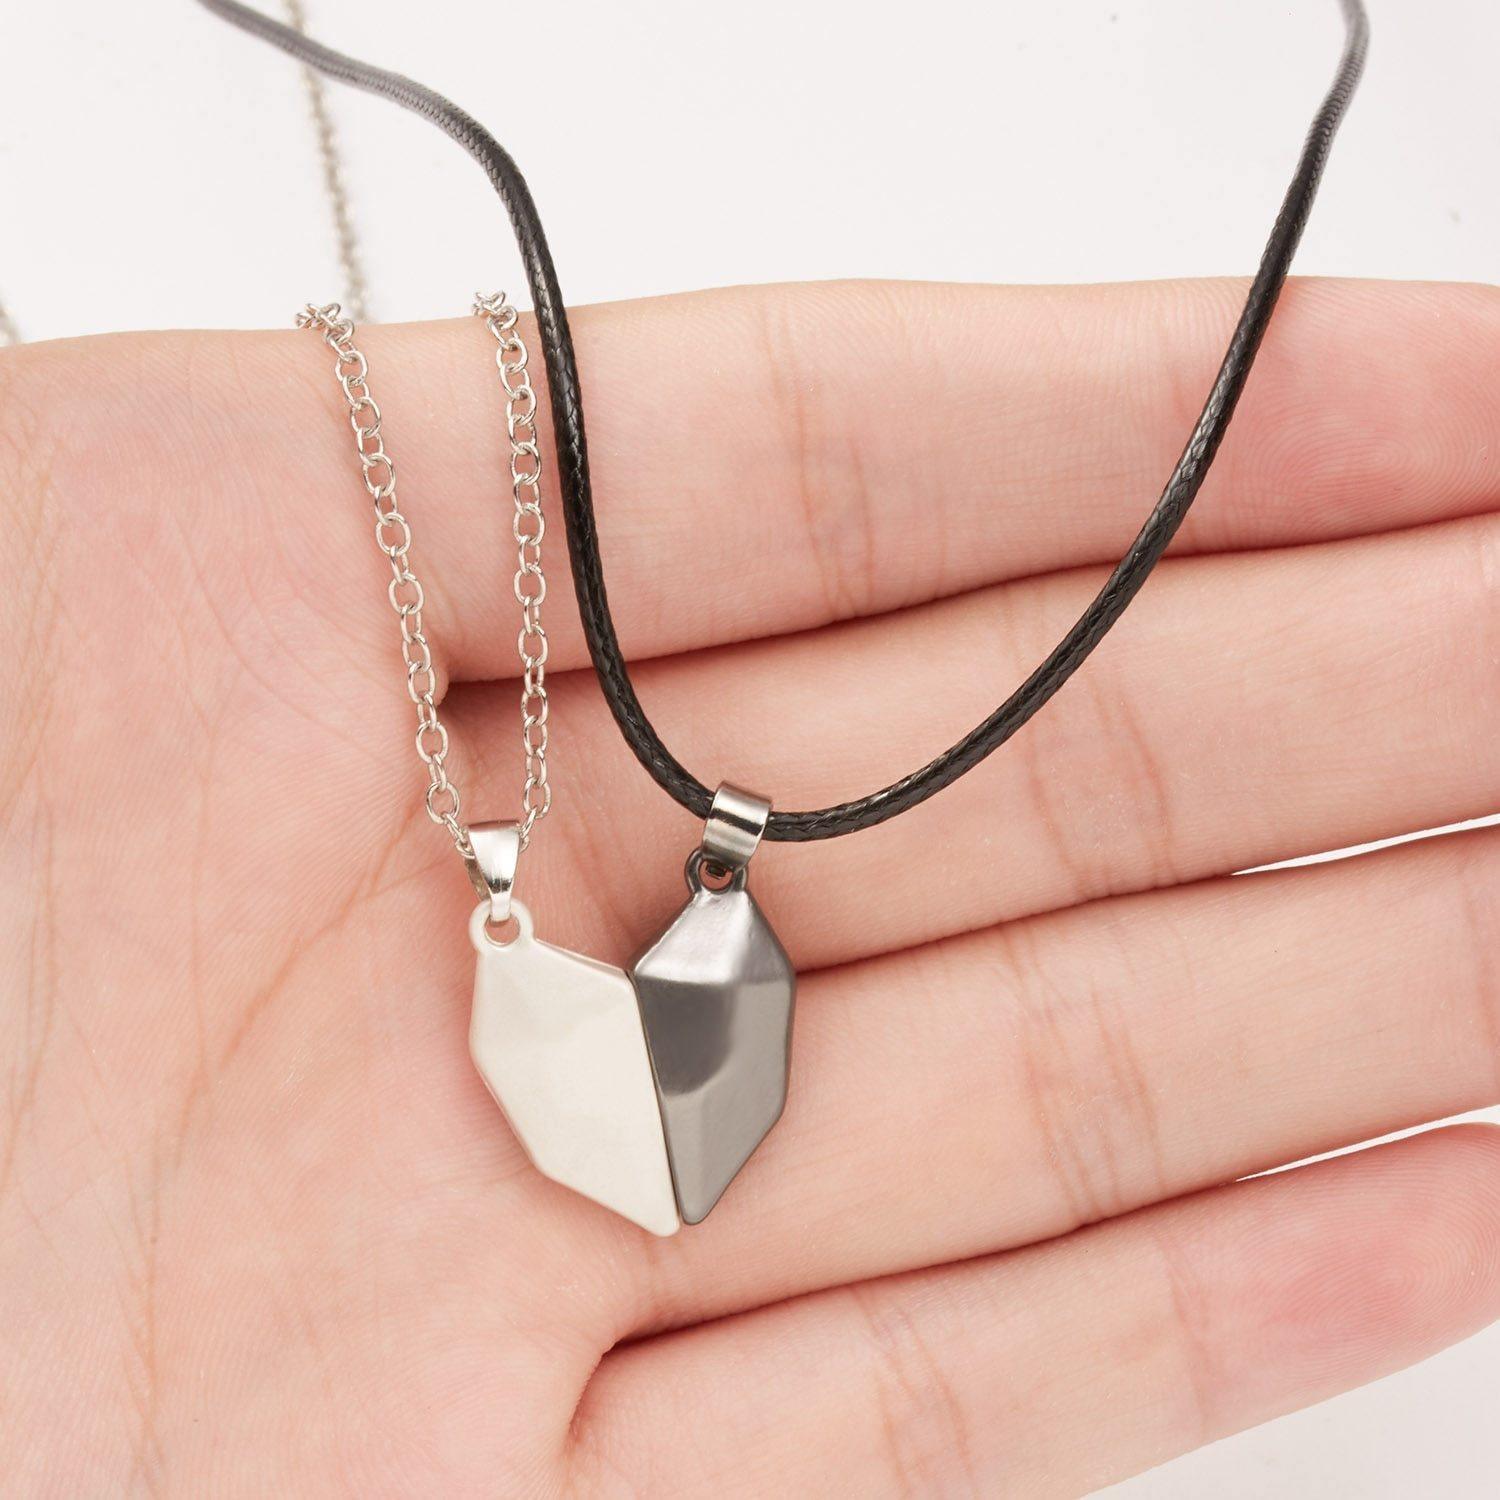 Magnetic Half Couple Necklaces Gift For My Girlfriend for Christmas 2023 | Magnetic Half Couple Necklaces Gift For My Girlfriend - undefined | gift, gift ideas, Magnetic Couple Necklace, necklace, Necklaces | From Hunny Life | hunnylife.com